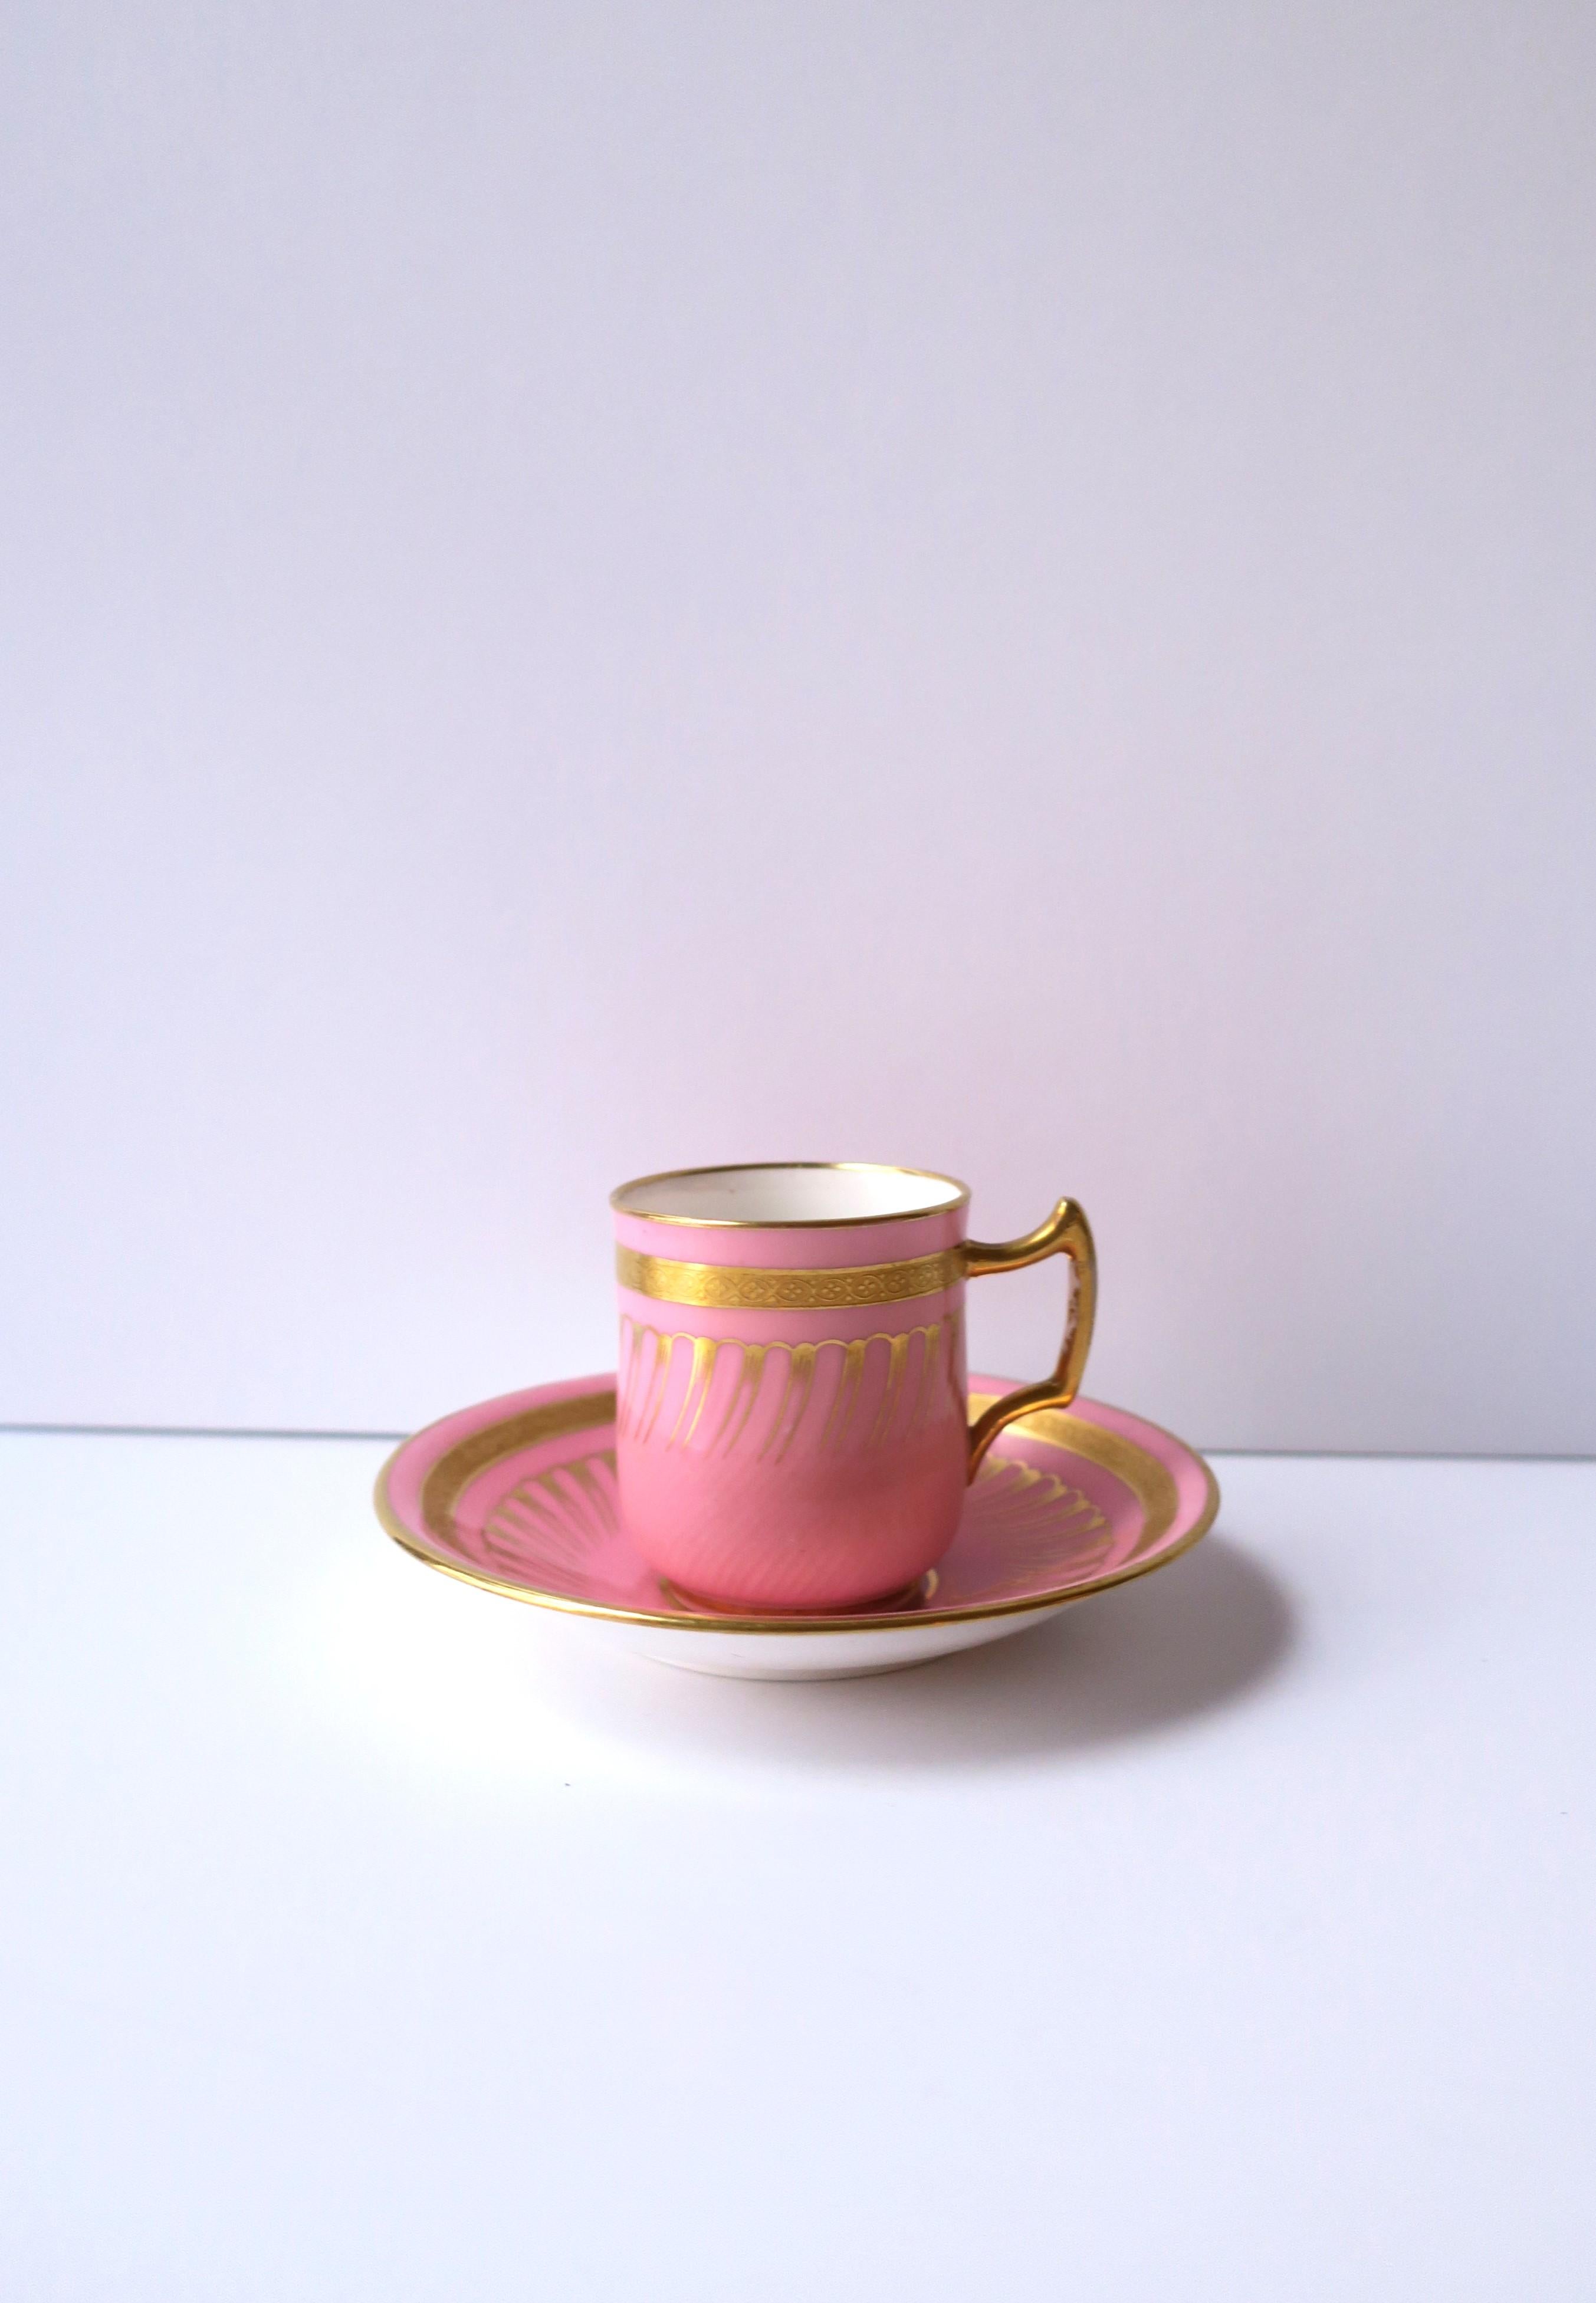 A very beautiful and rare antique English pink and gold porcelain coffee espresso cup and saucer made by Minton expressly for Gilman Collamore & Co., New York, circa late 19th-century, England. The pink and gold hues over white porcelain make a